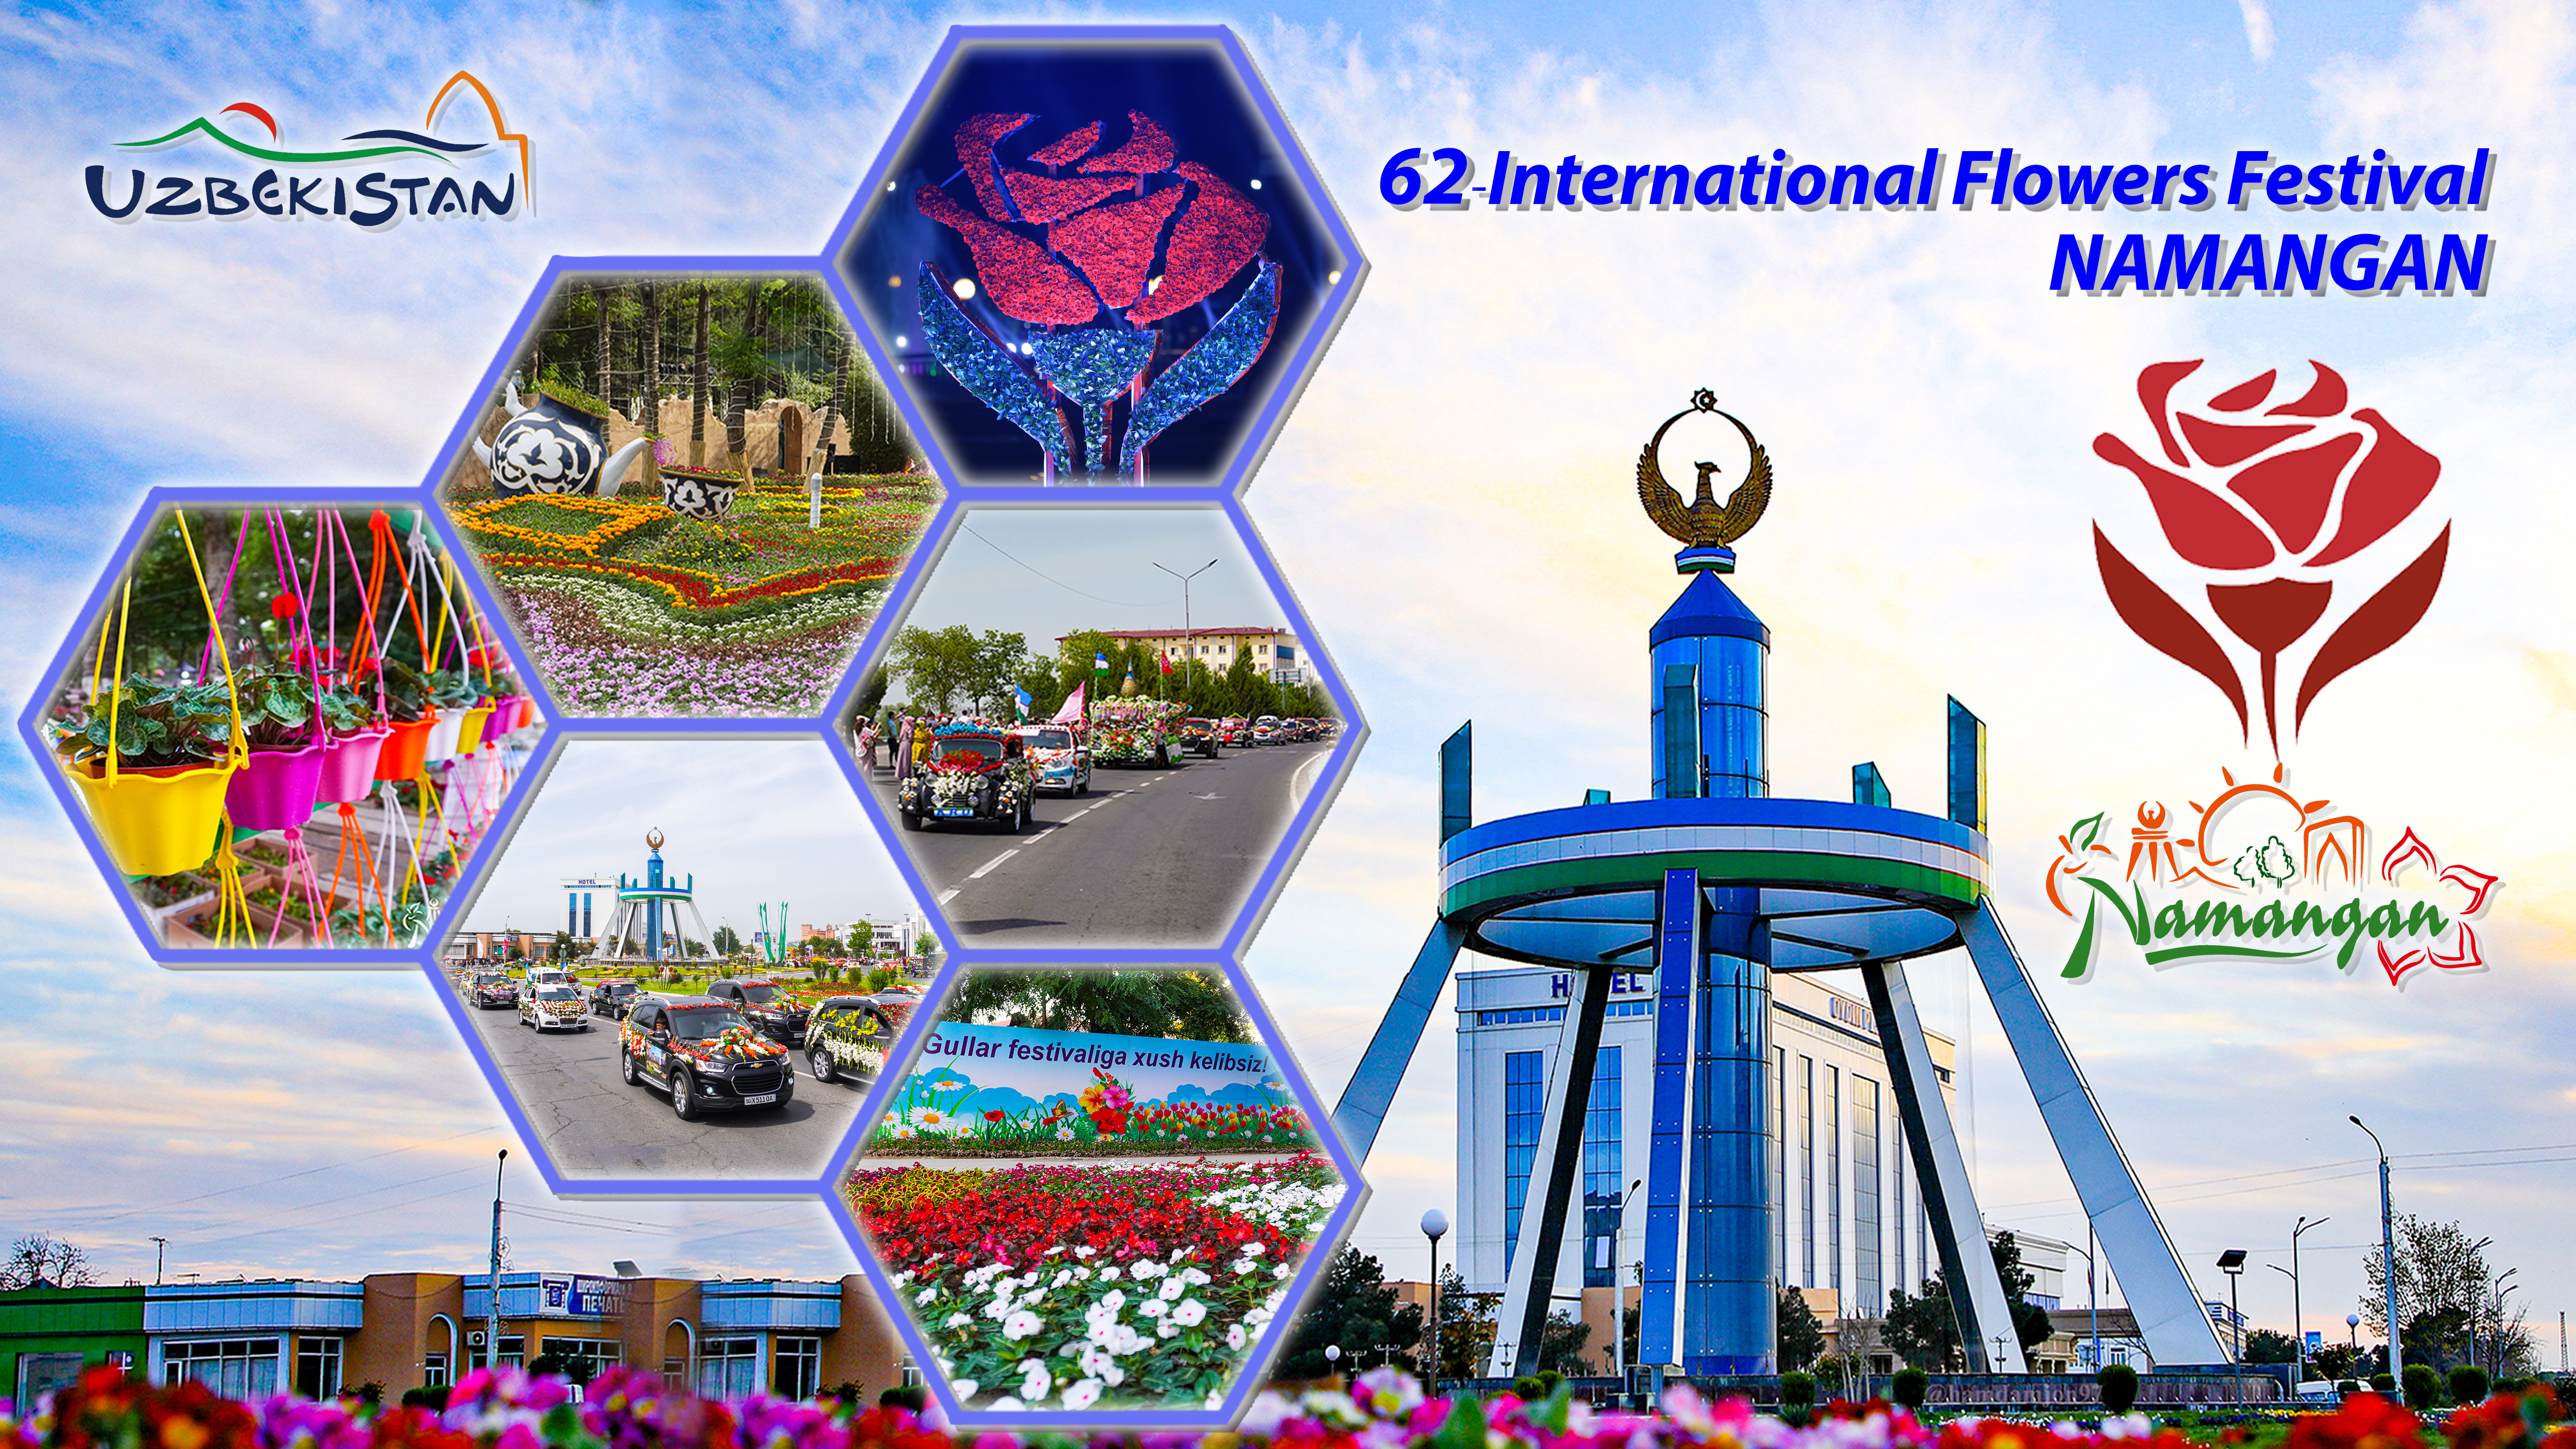 Namangan  city will host the 62nd International Flower Festival from May 21 to June 4!